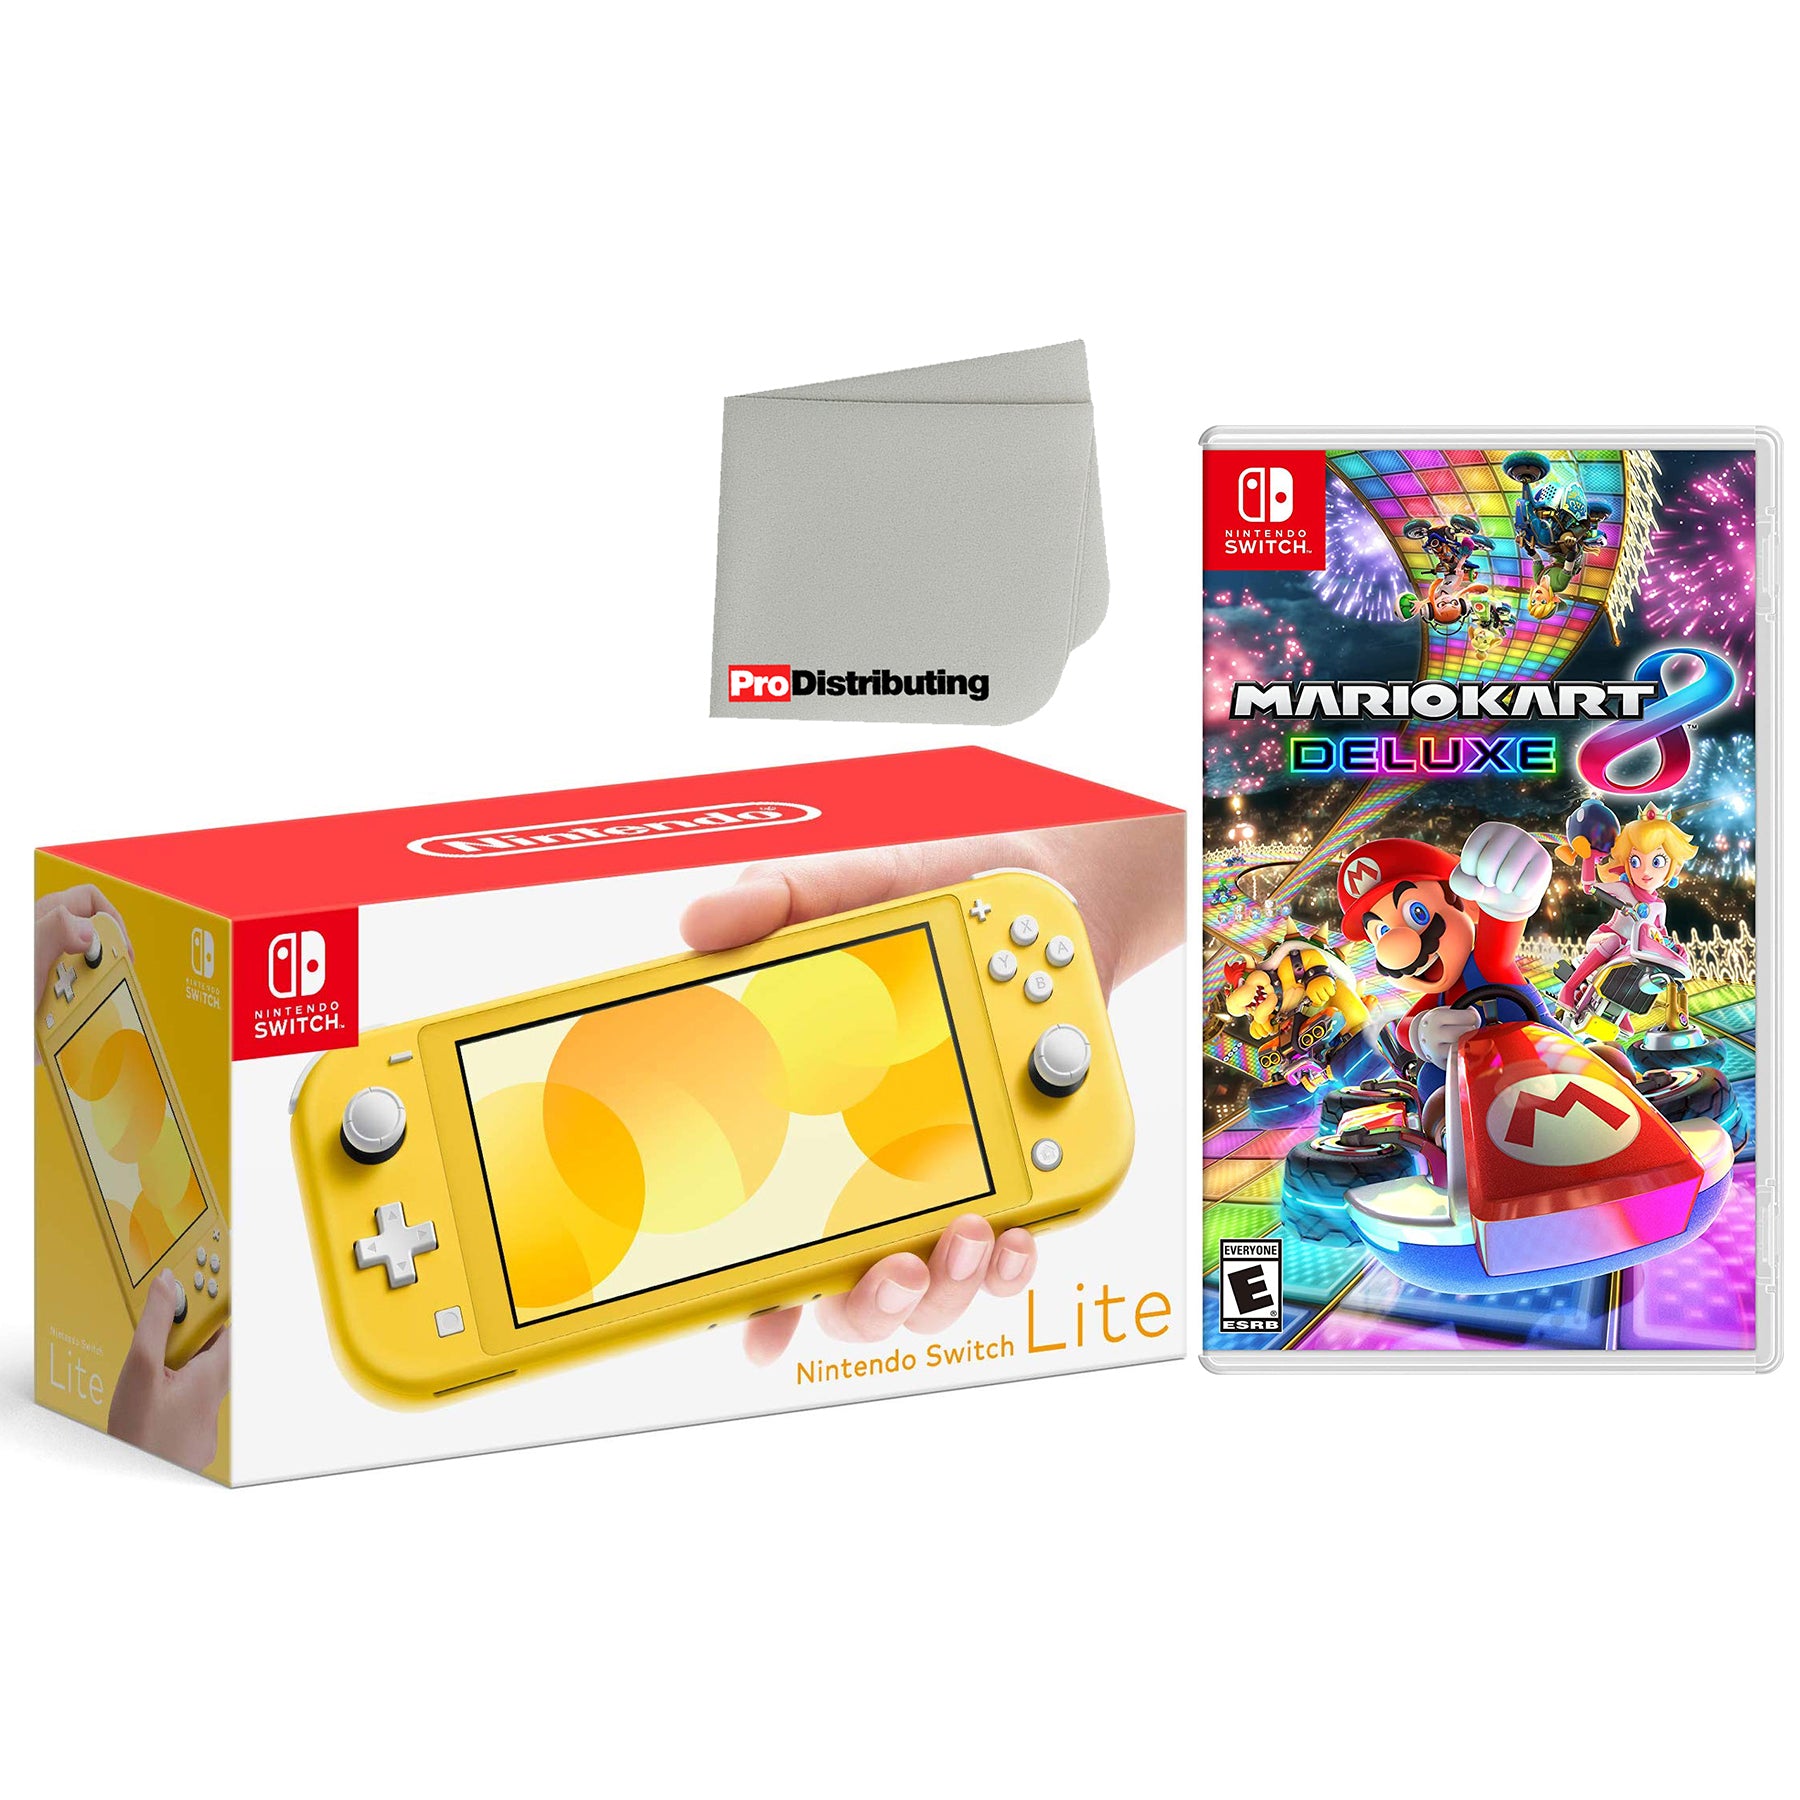 Nintendo Switch Lite 32GB Handheld Video Game Console in Yellow with Mario Kart 8 Deluxe Game Bundle - Pro-Distributing